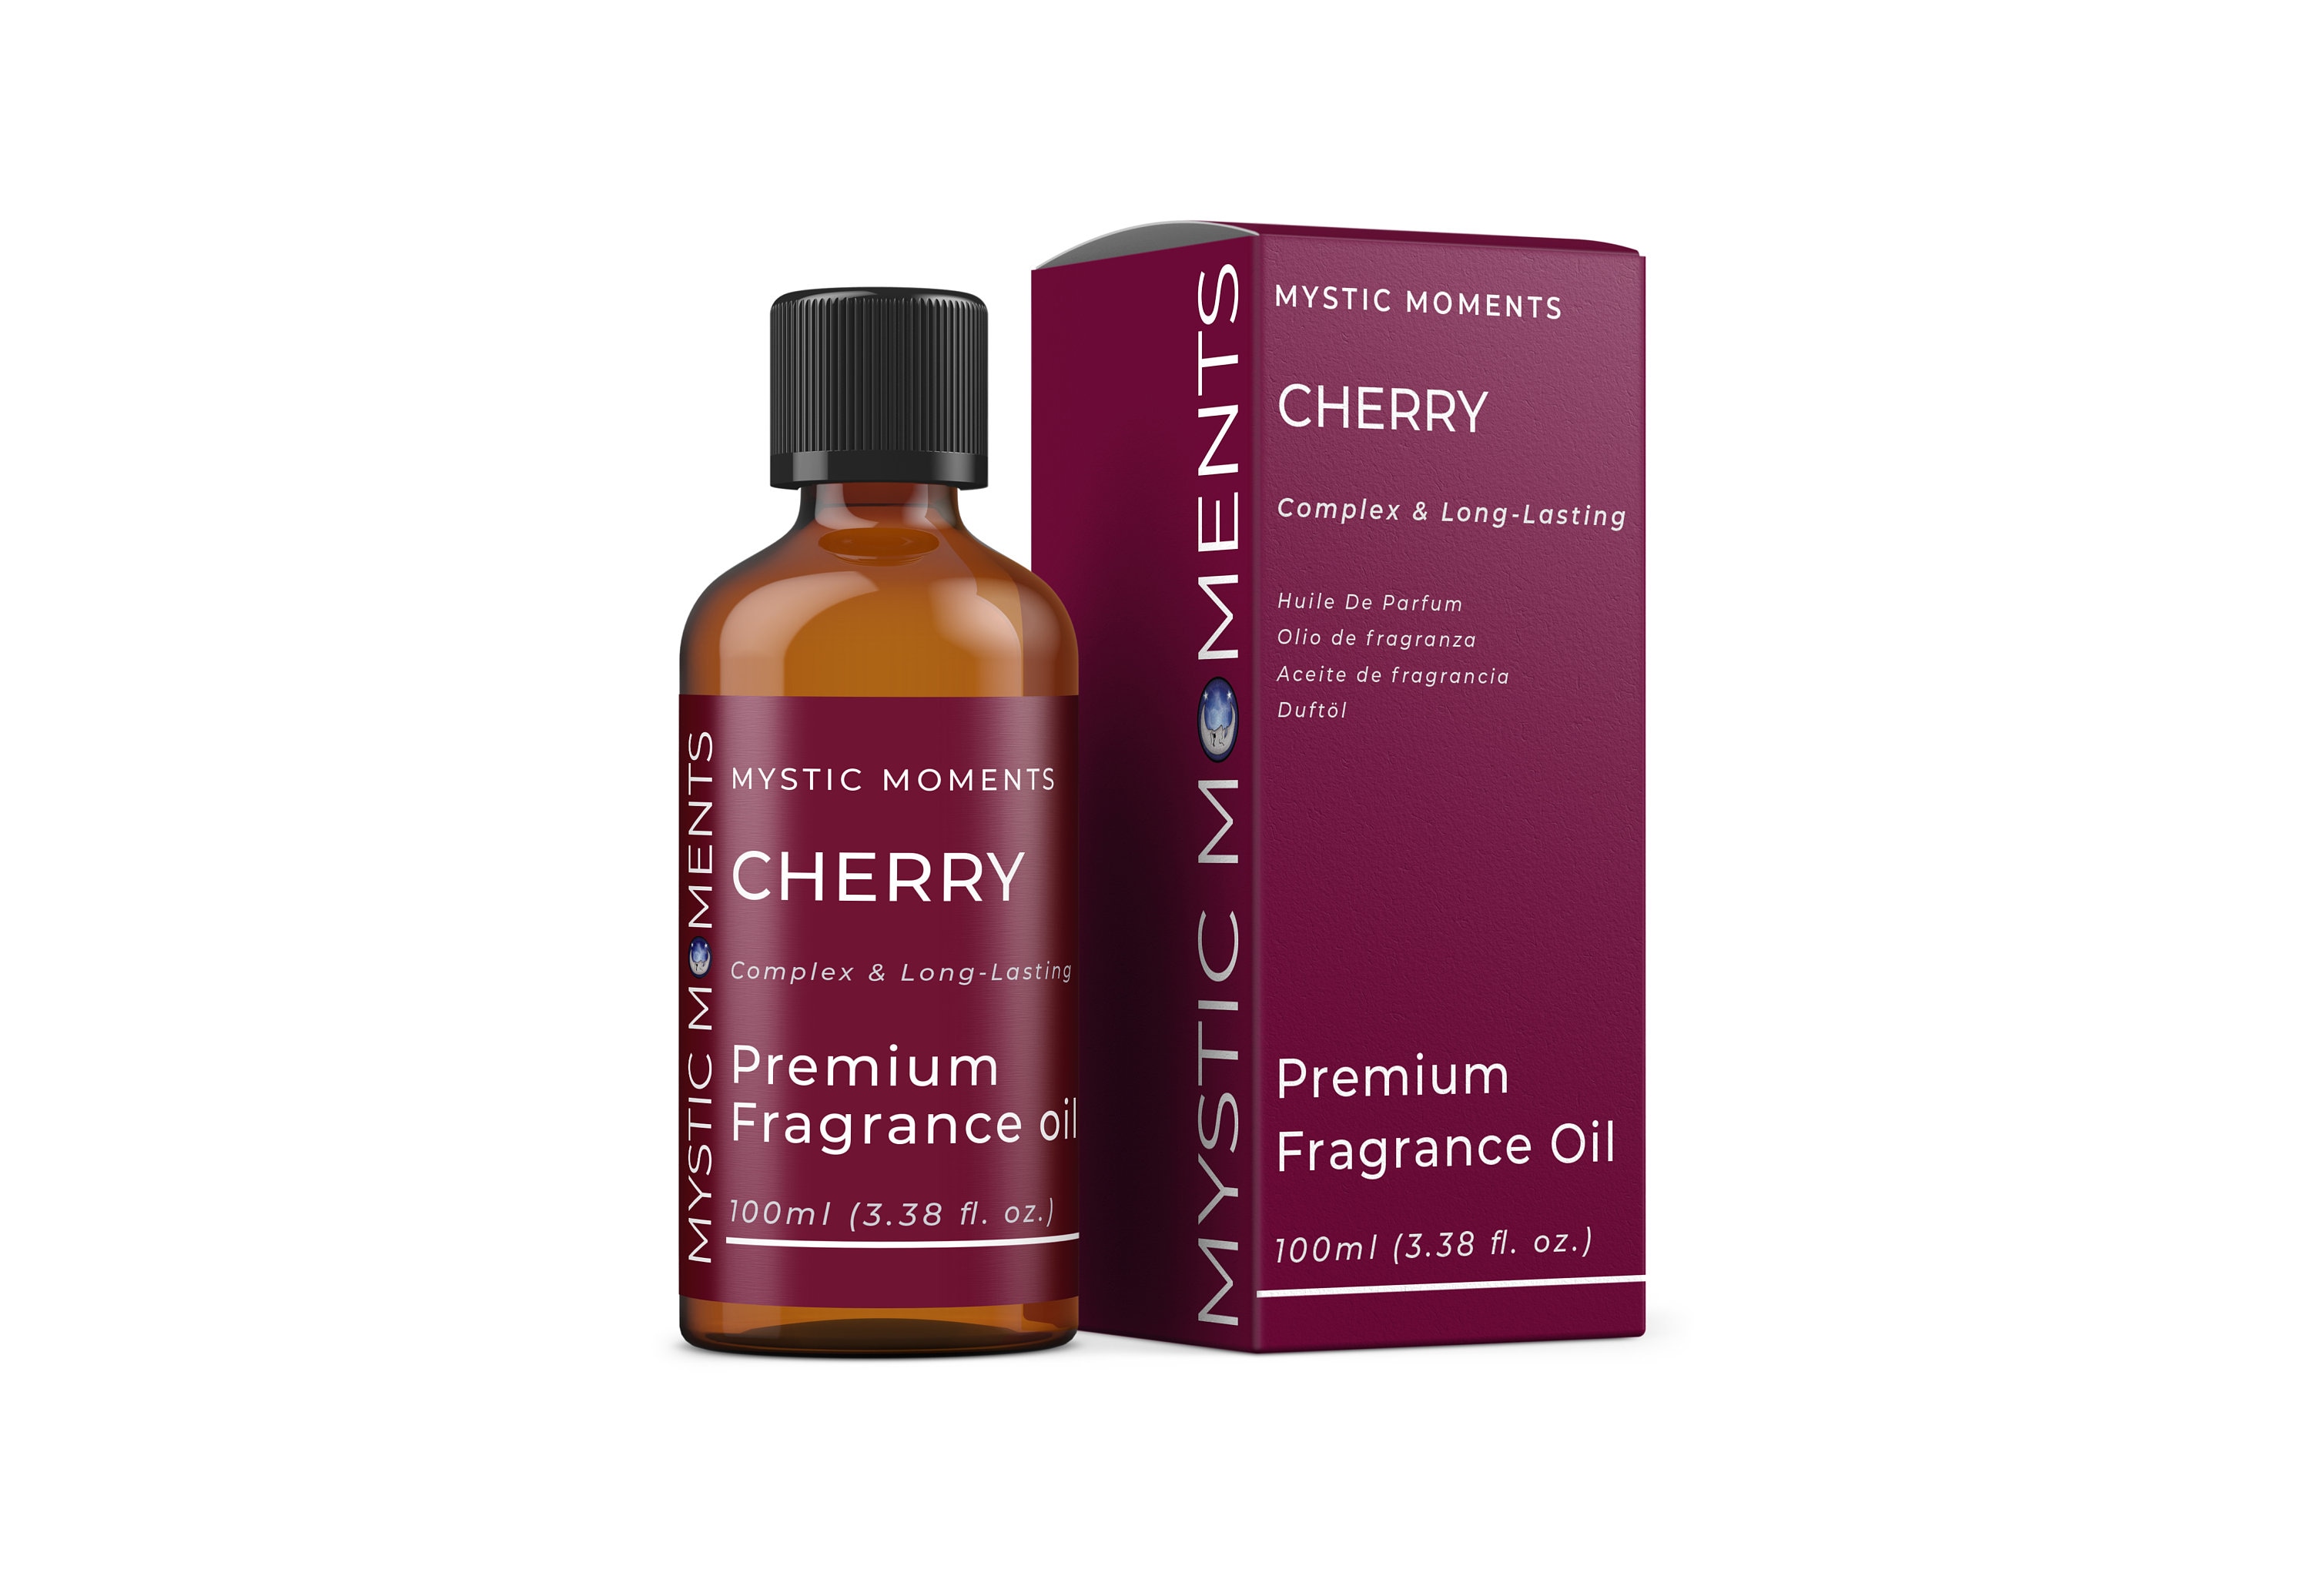 2-Pack Cherry Essential Oil, Pure, Undiluted, Therapeutic Grade Cherry Oil  - 2x10 mL